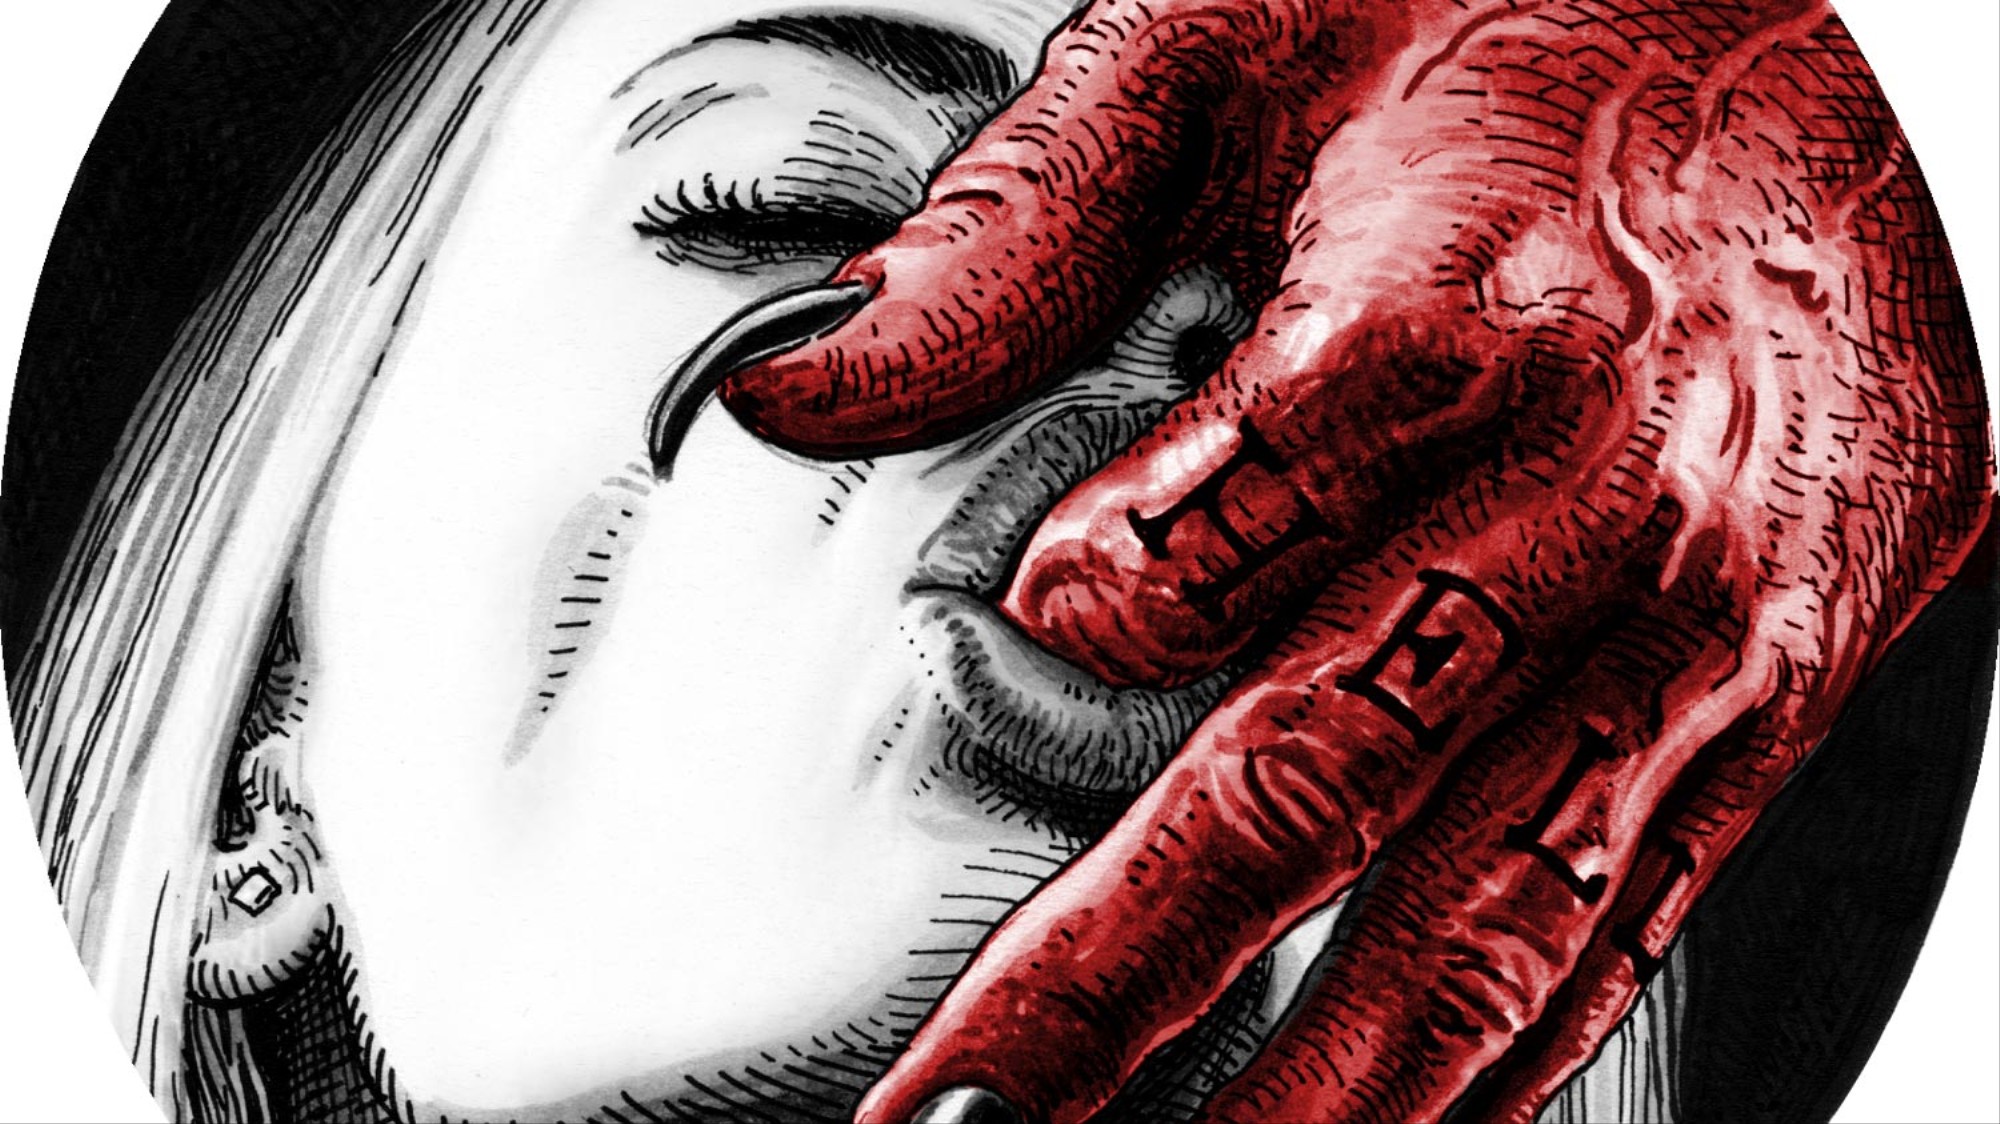 NSFW] These Devilish Illustrations Are Sinfully Sexy - VICE